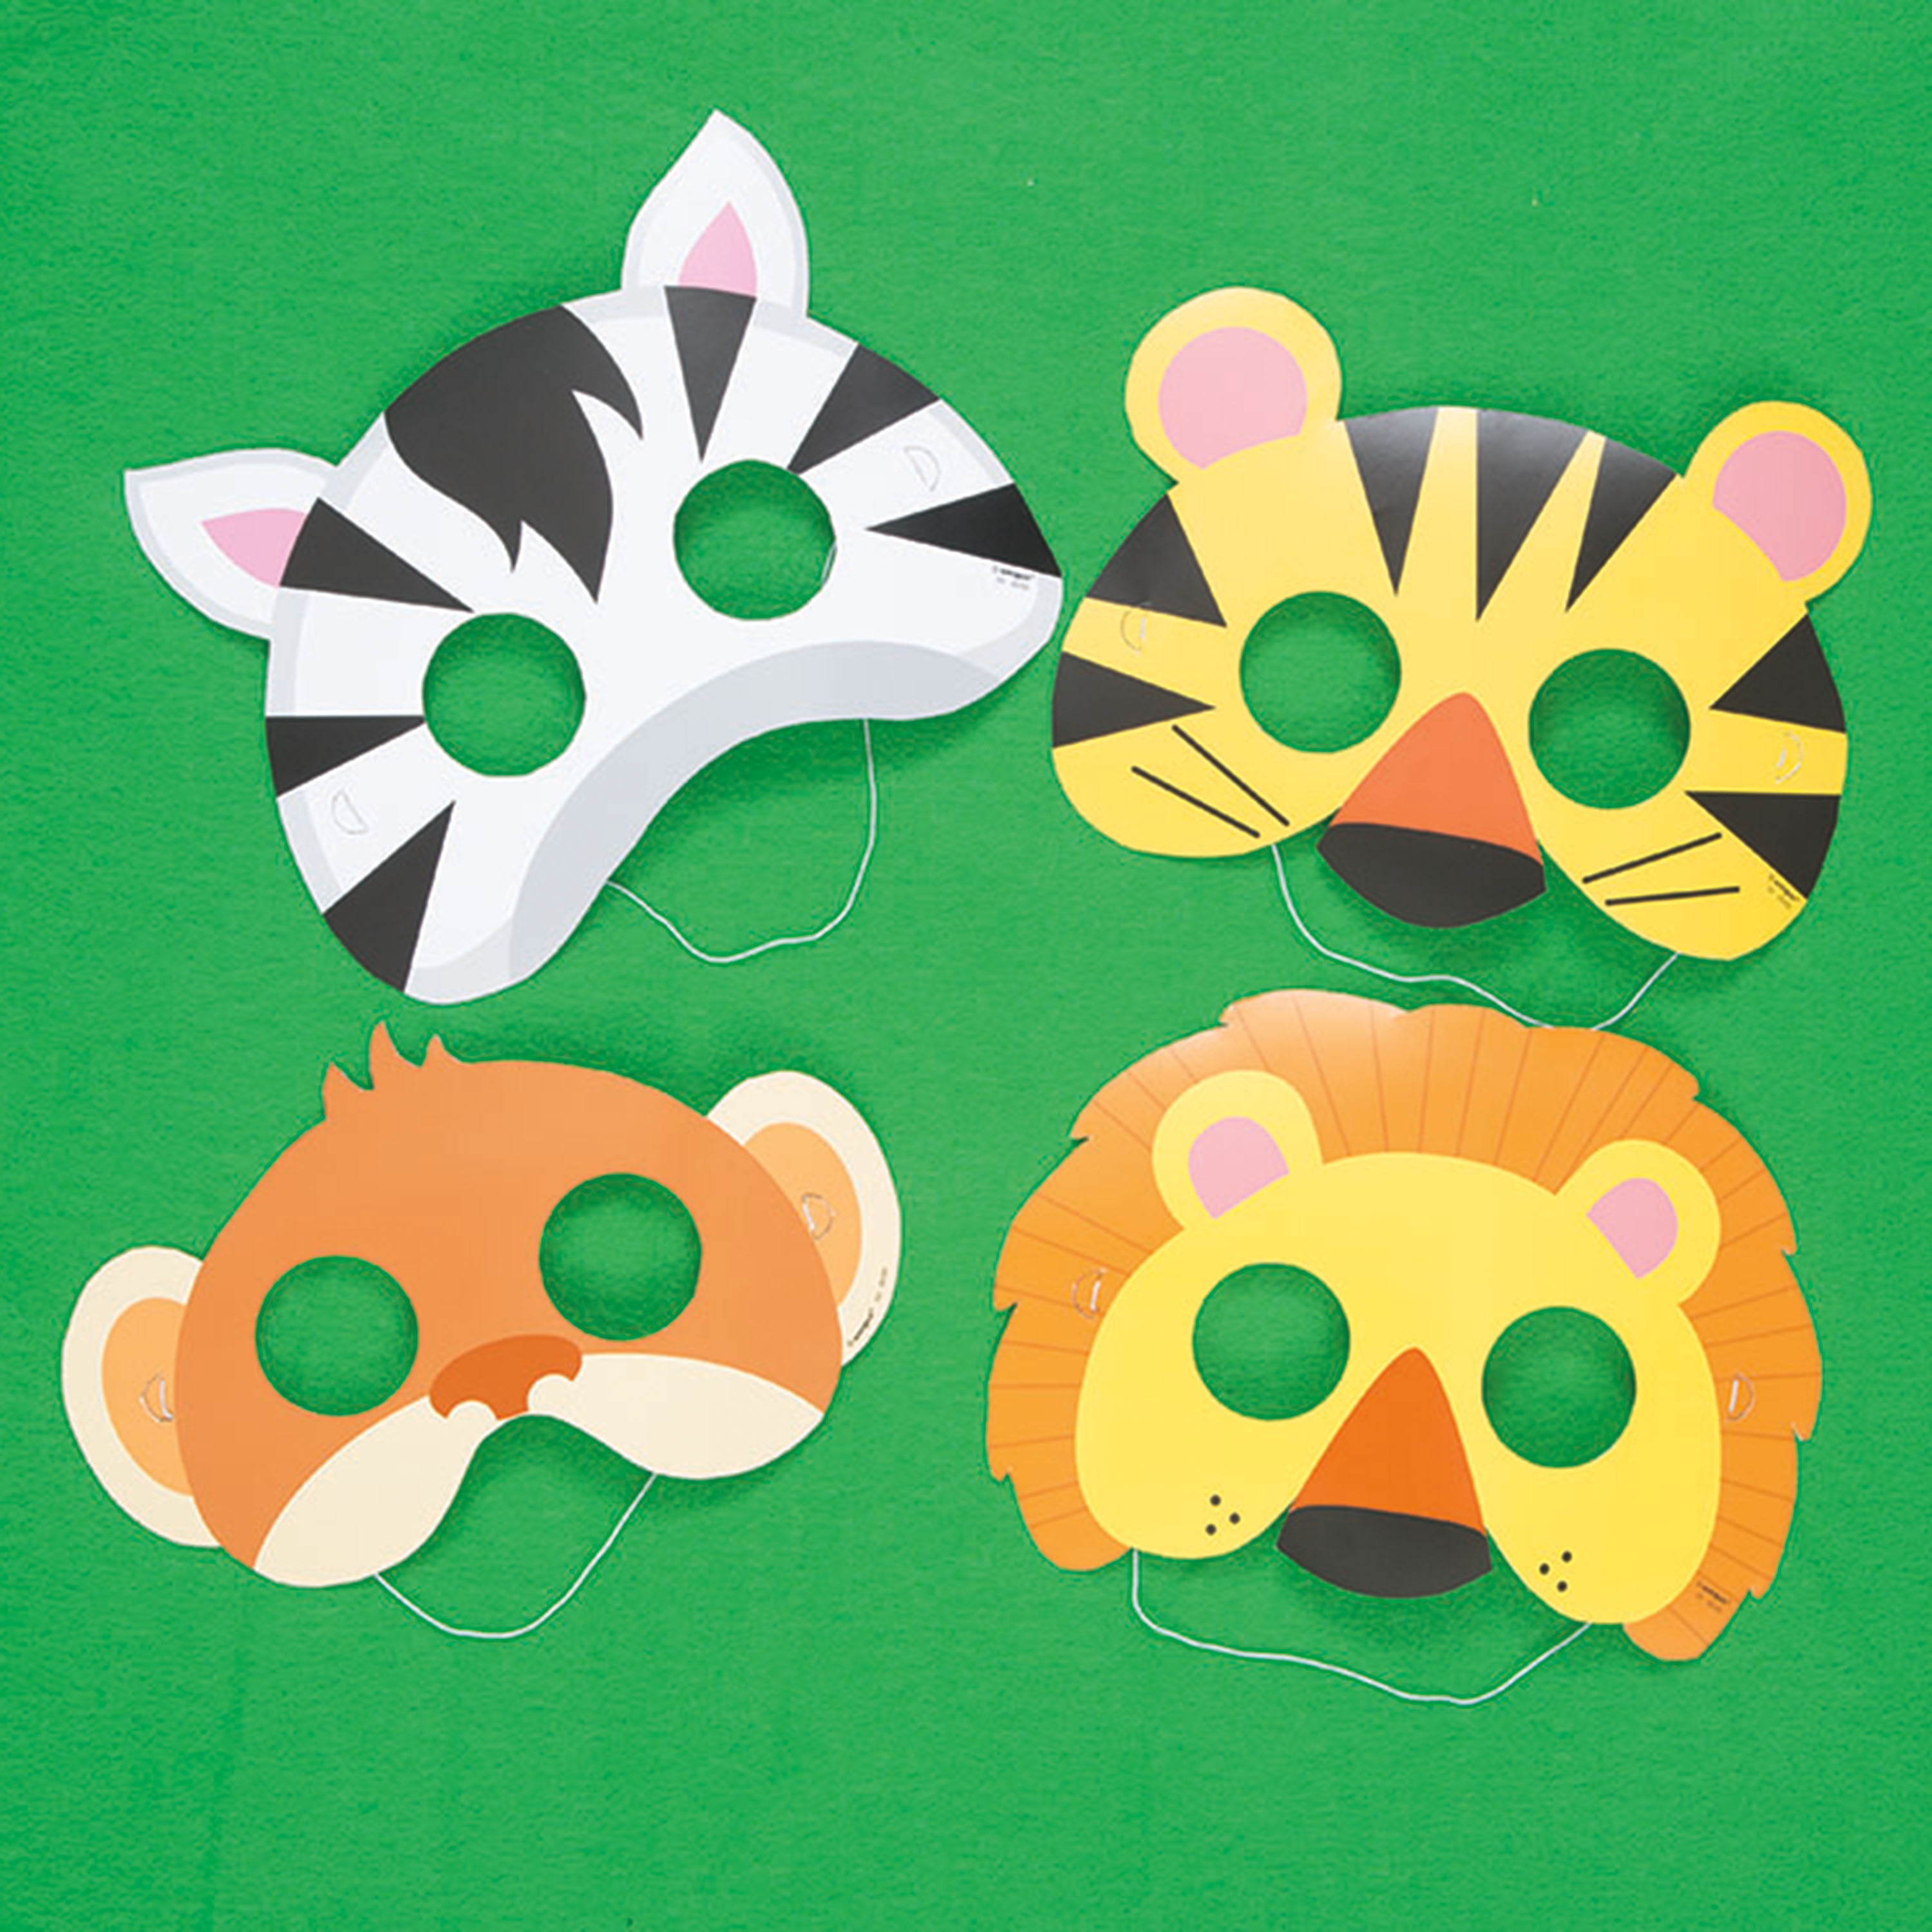 Talking Tables Party Animals Paper Masks (8)